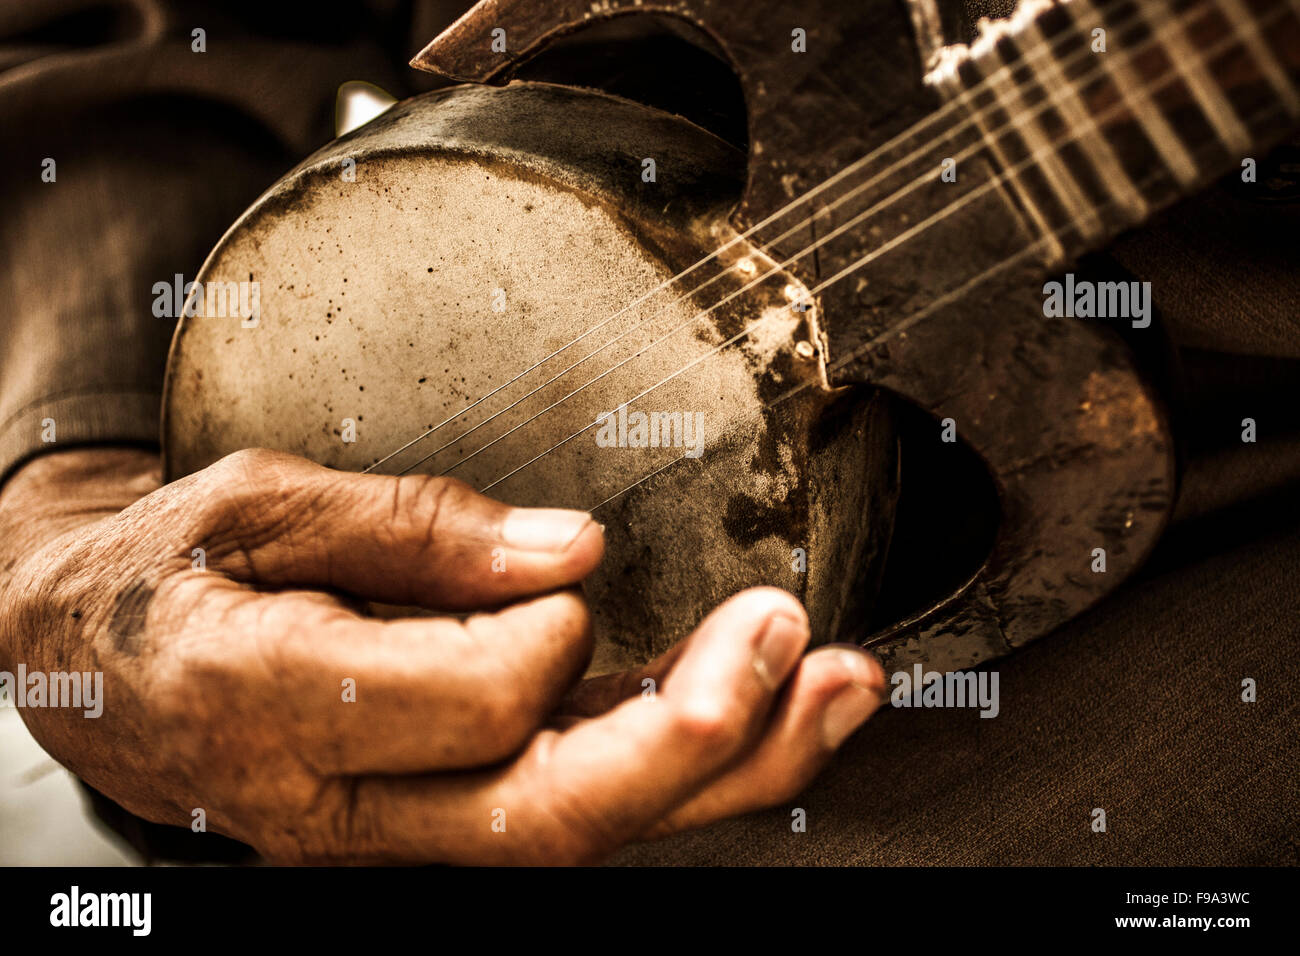 Detail of a man playing a Central Asian instrument. Stock Photo